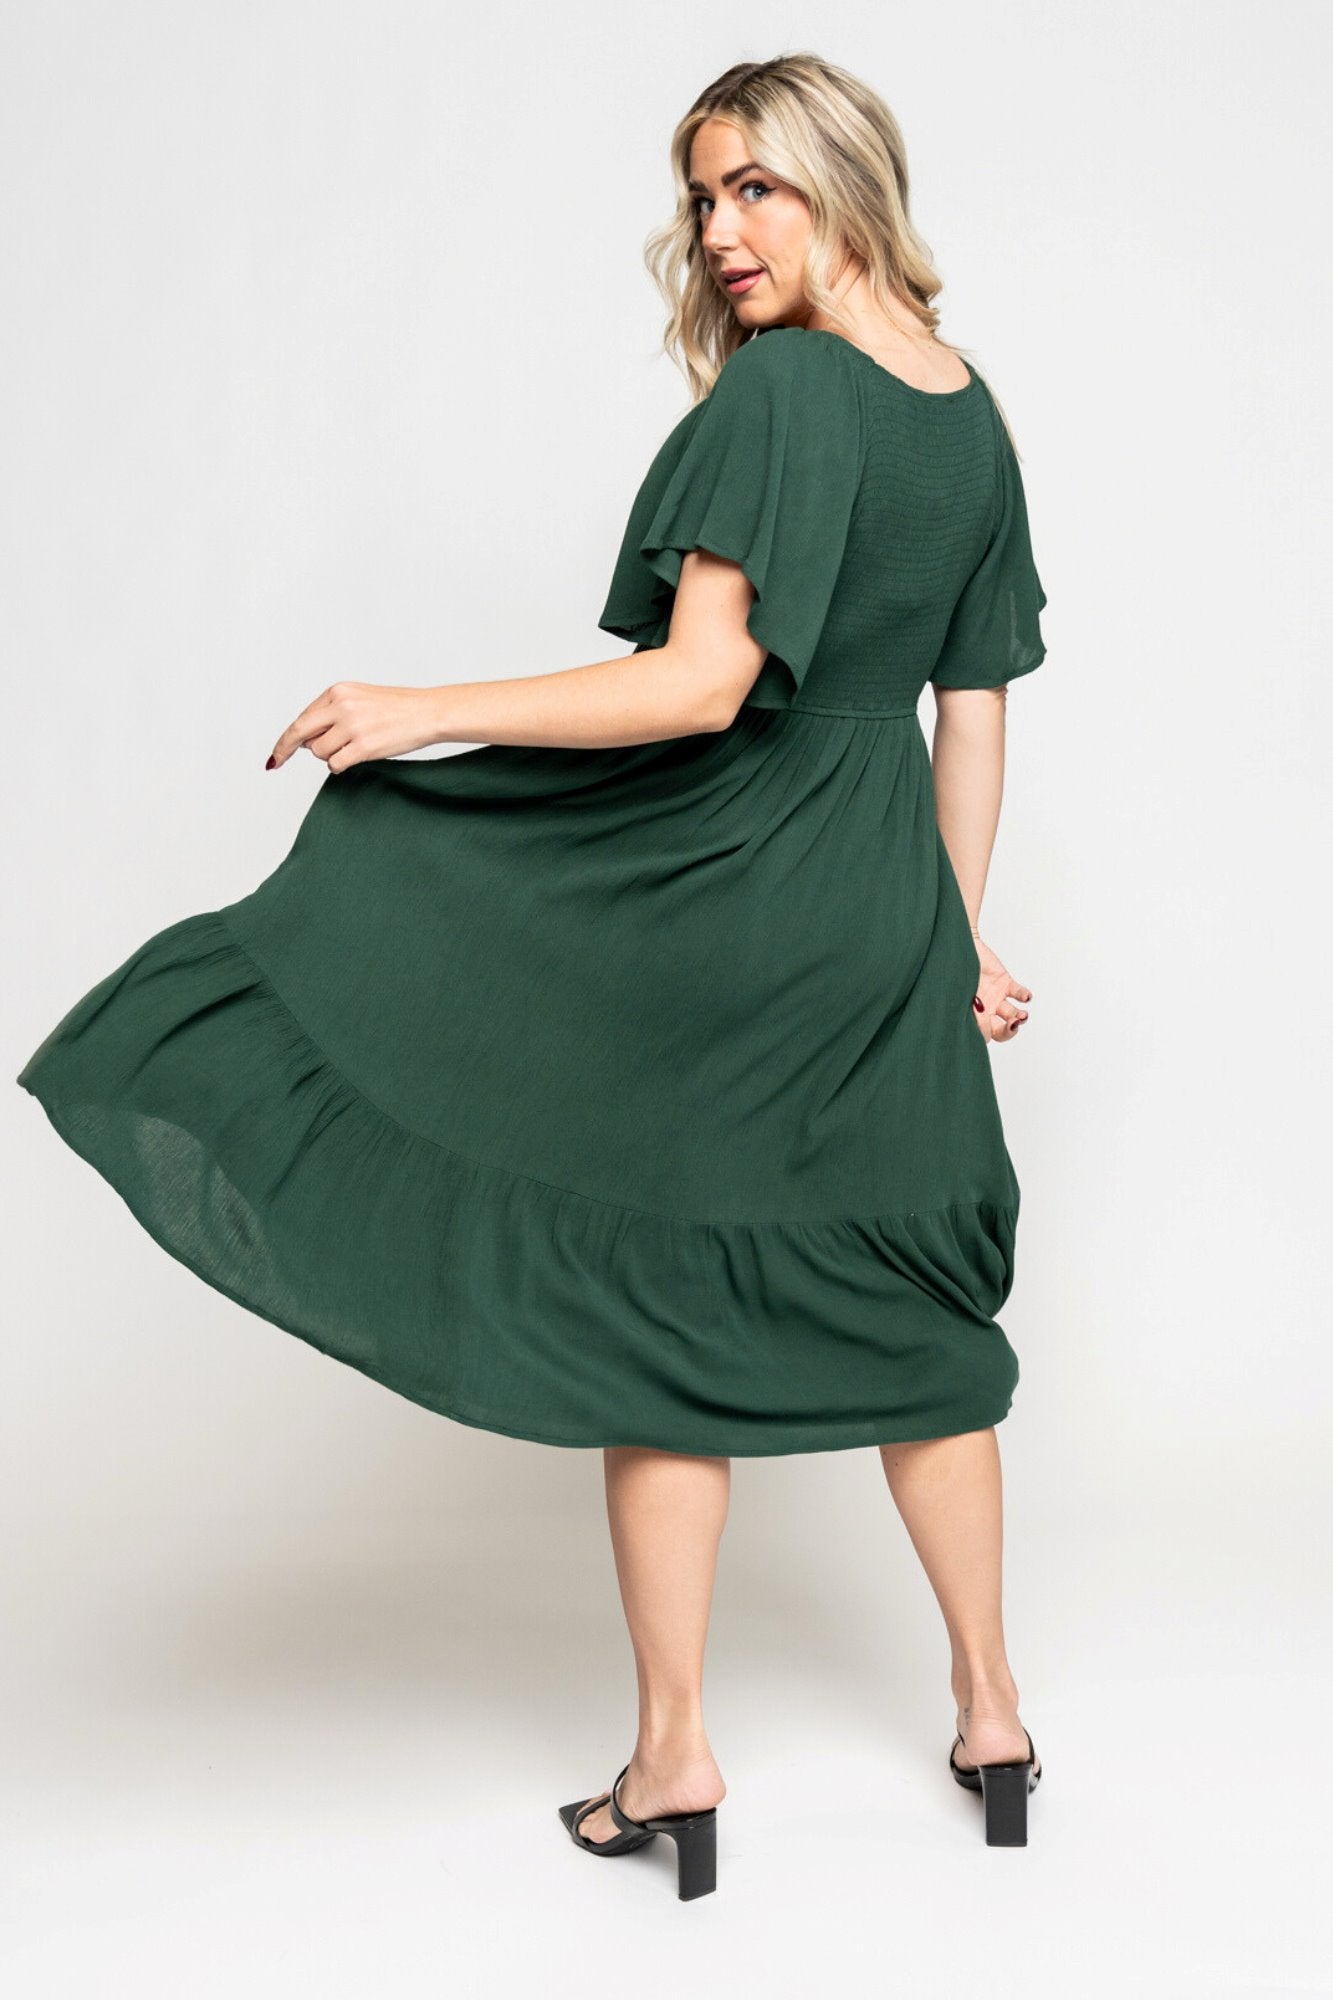 HOLLEY GIRL EXCLUSIVE - Sofia Dress in Emerald - FINAL SALE – Holley Girl